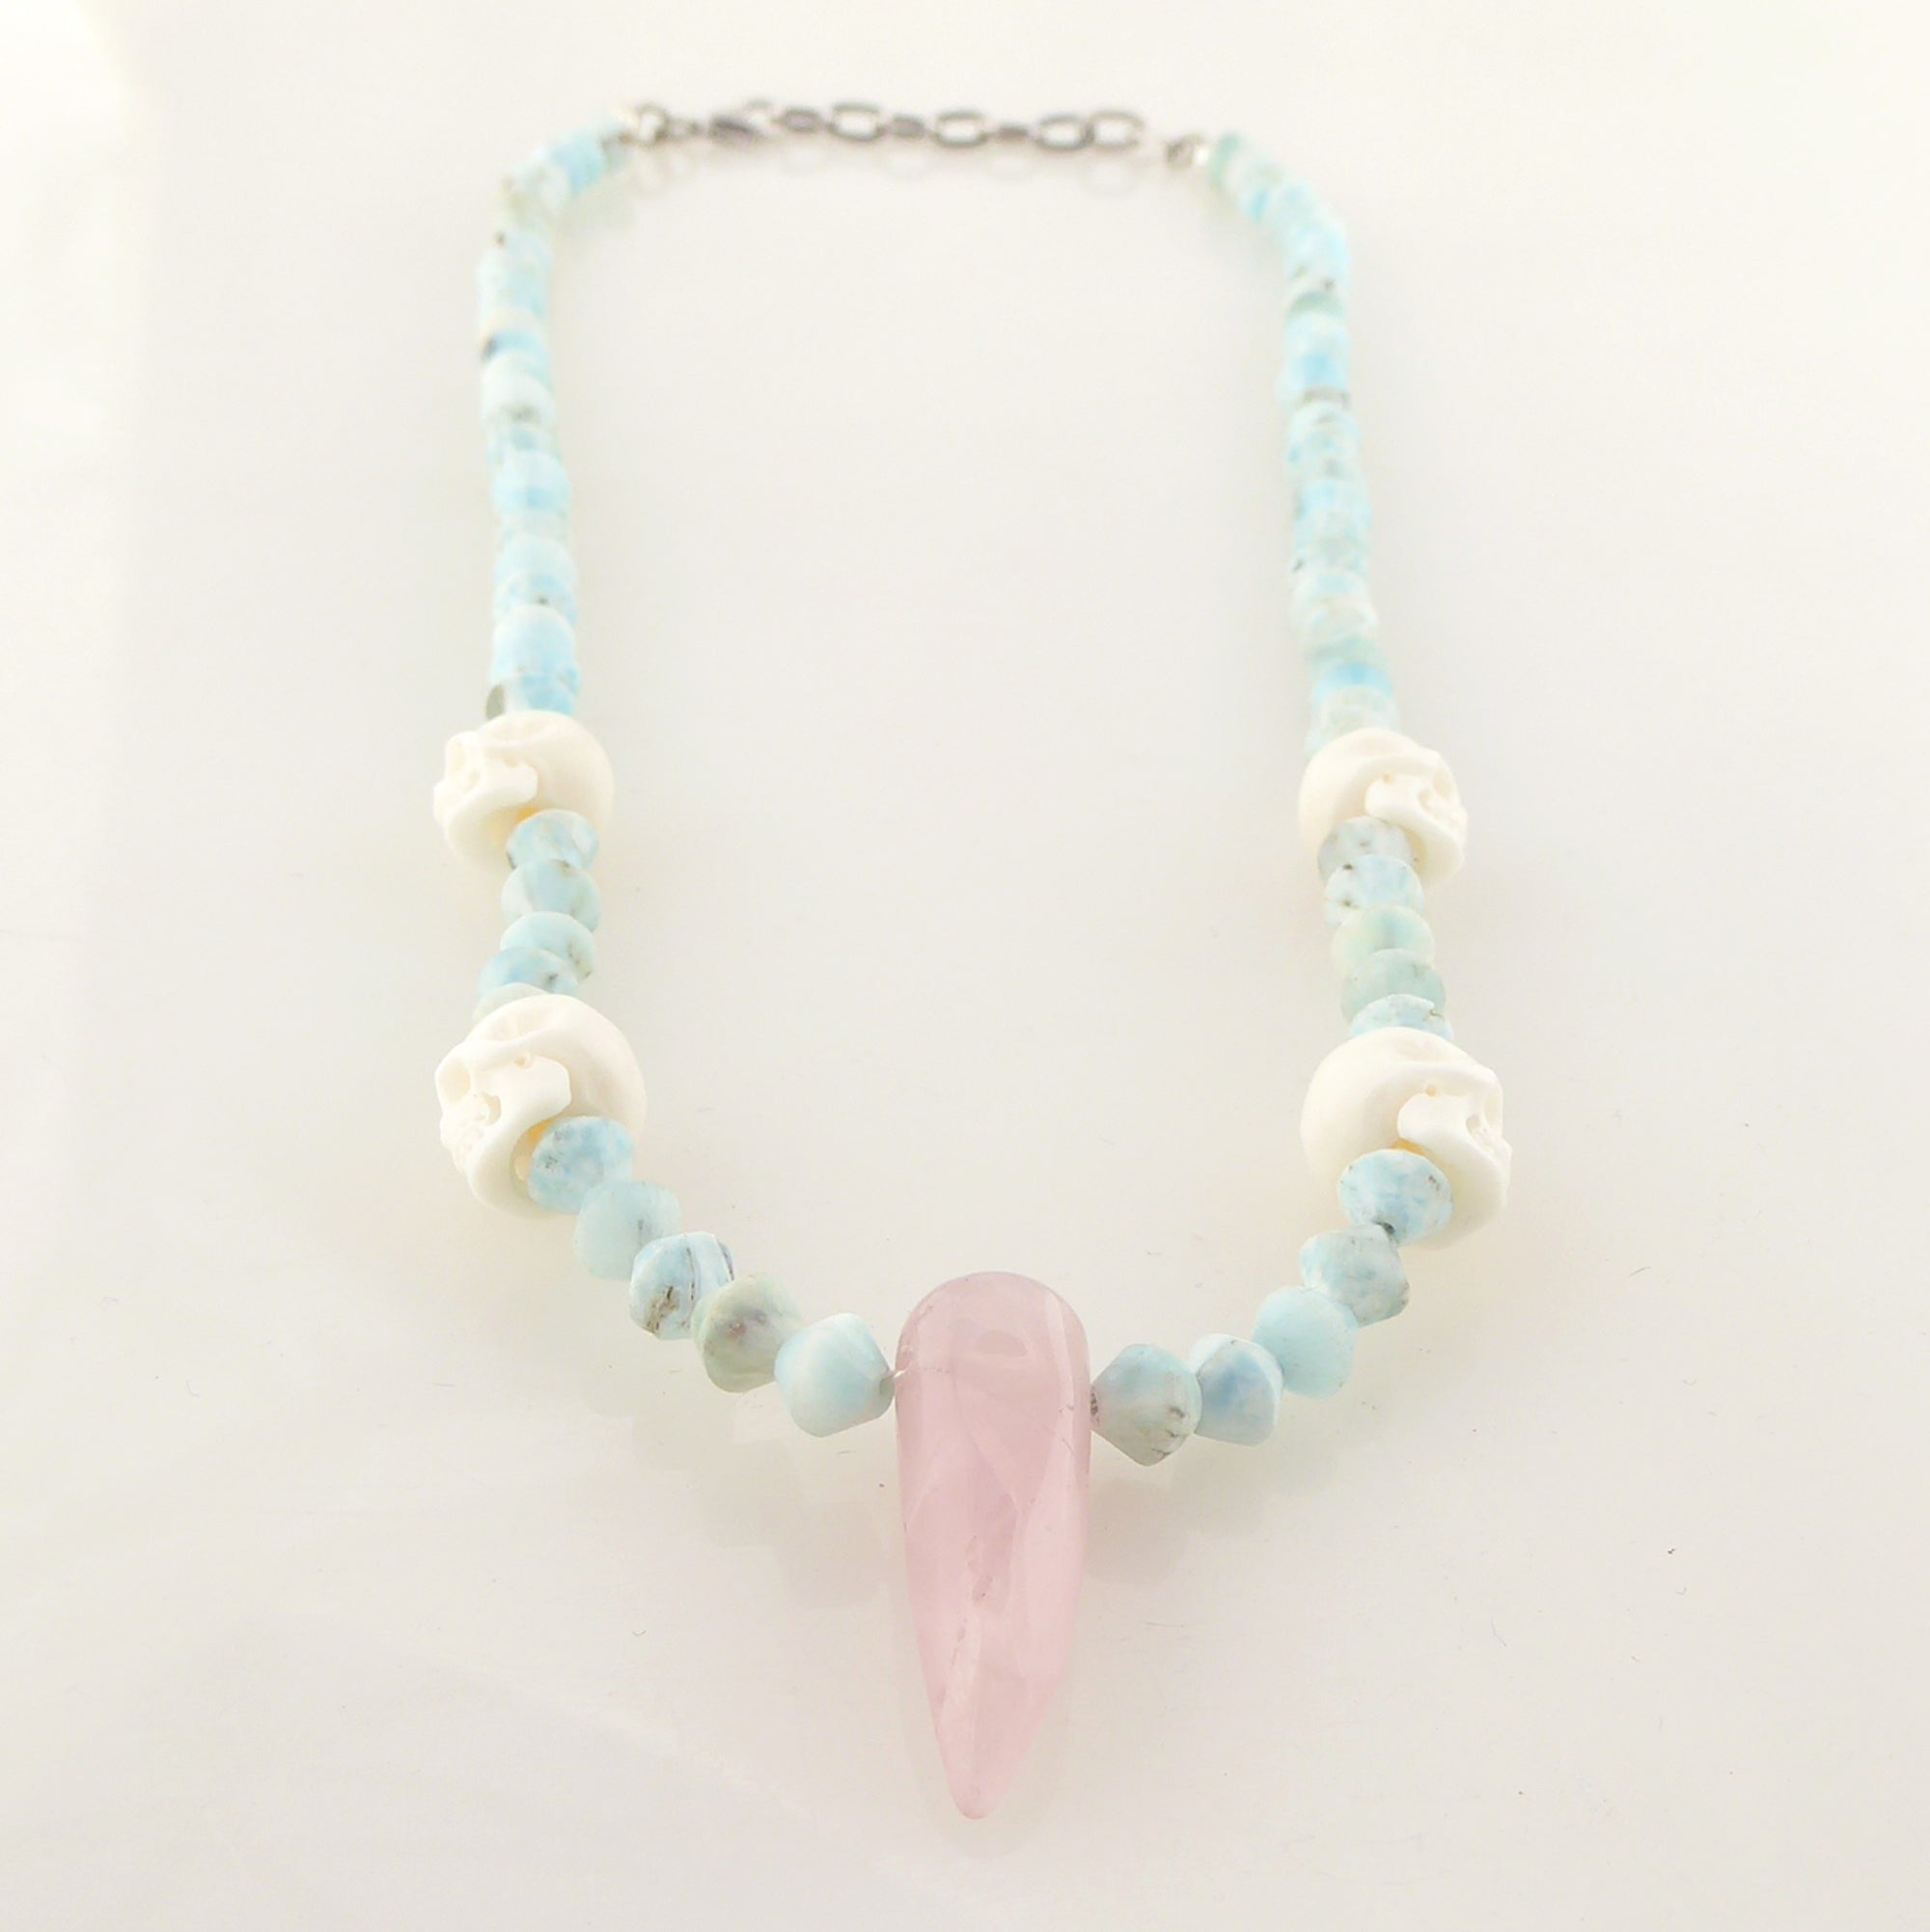 Rose quartz and carved skull necklace by Jenny Dayco 3